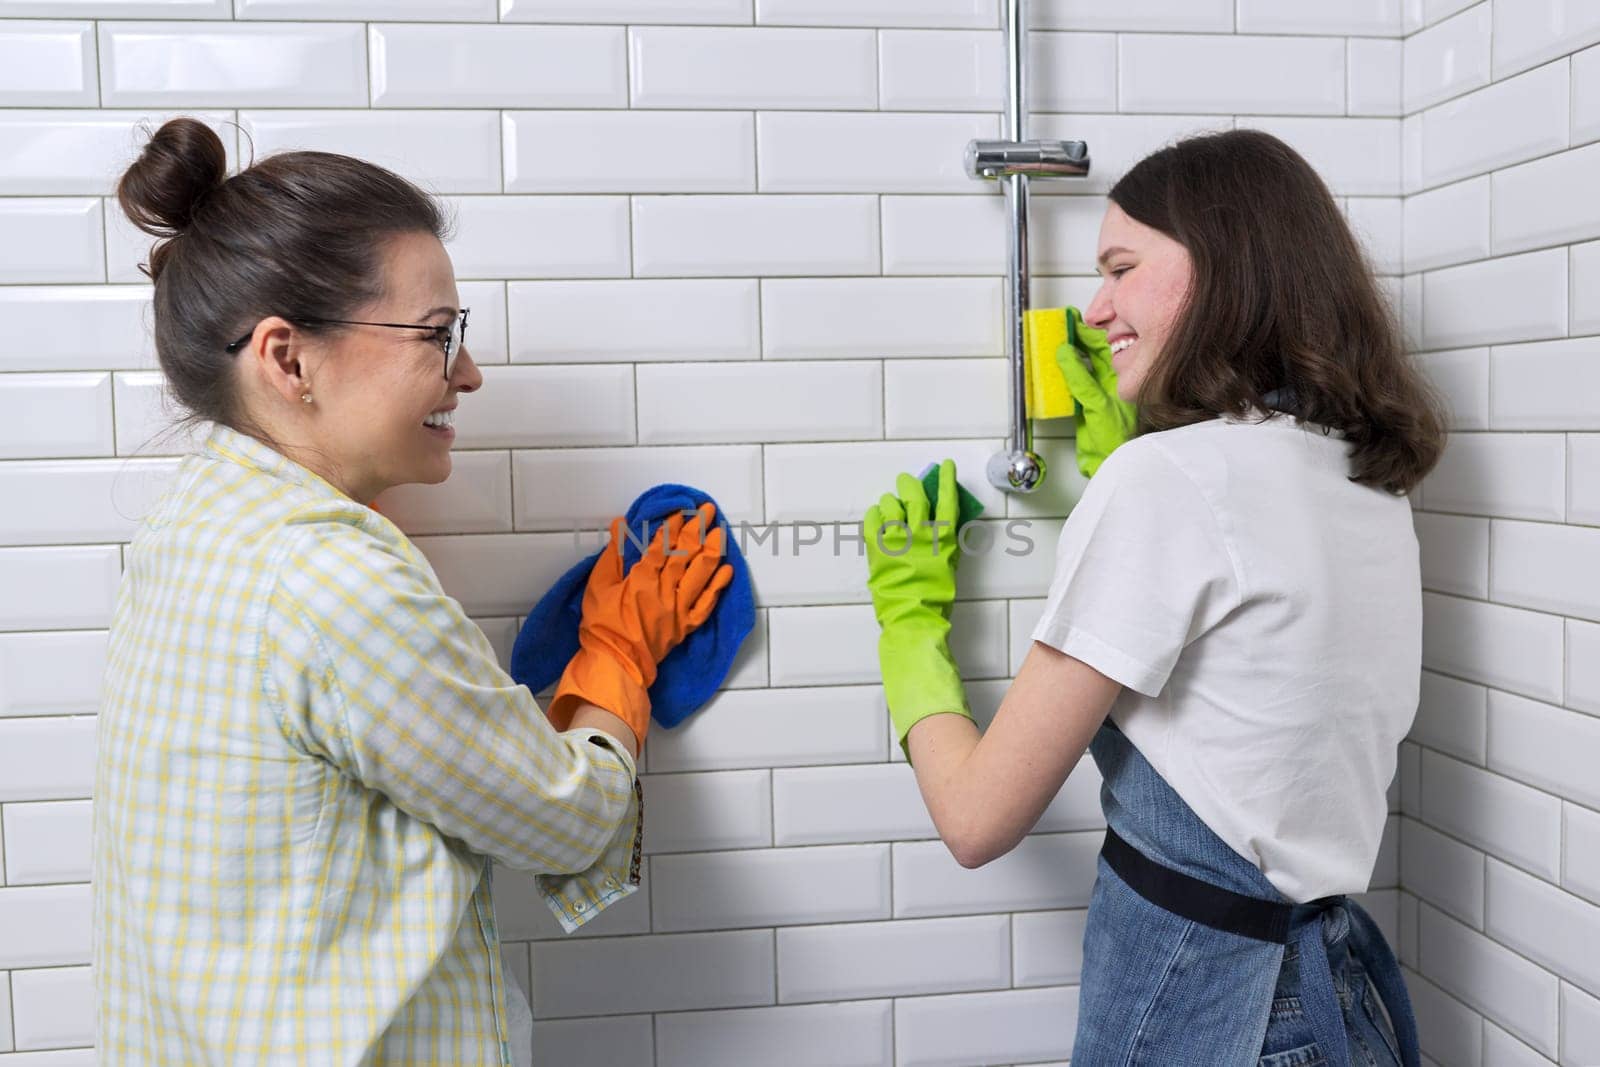 Mother and teenager daughter cleaning together in bathroom. Girl helping mother clean at home. Teens and parents, relationships, cleanliness and housekeeping, household duties